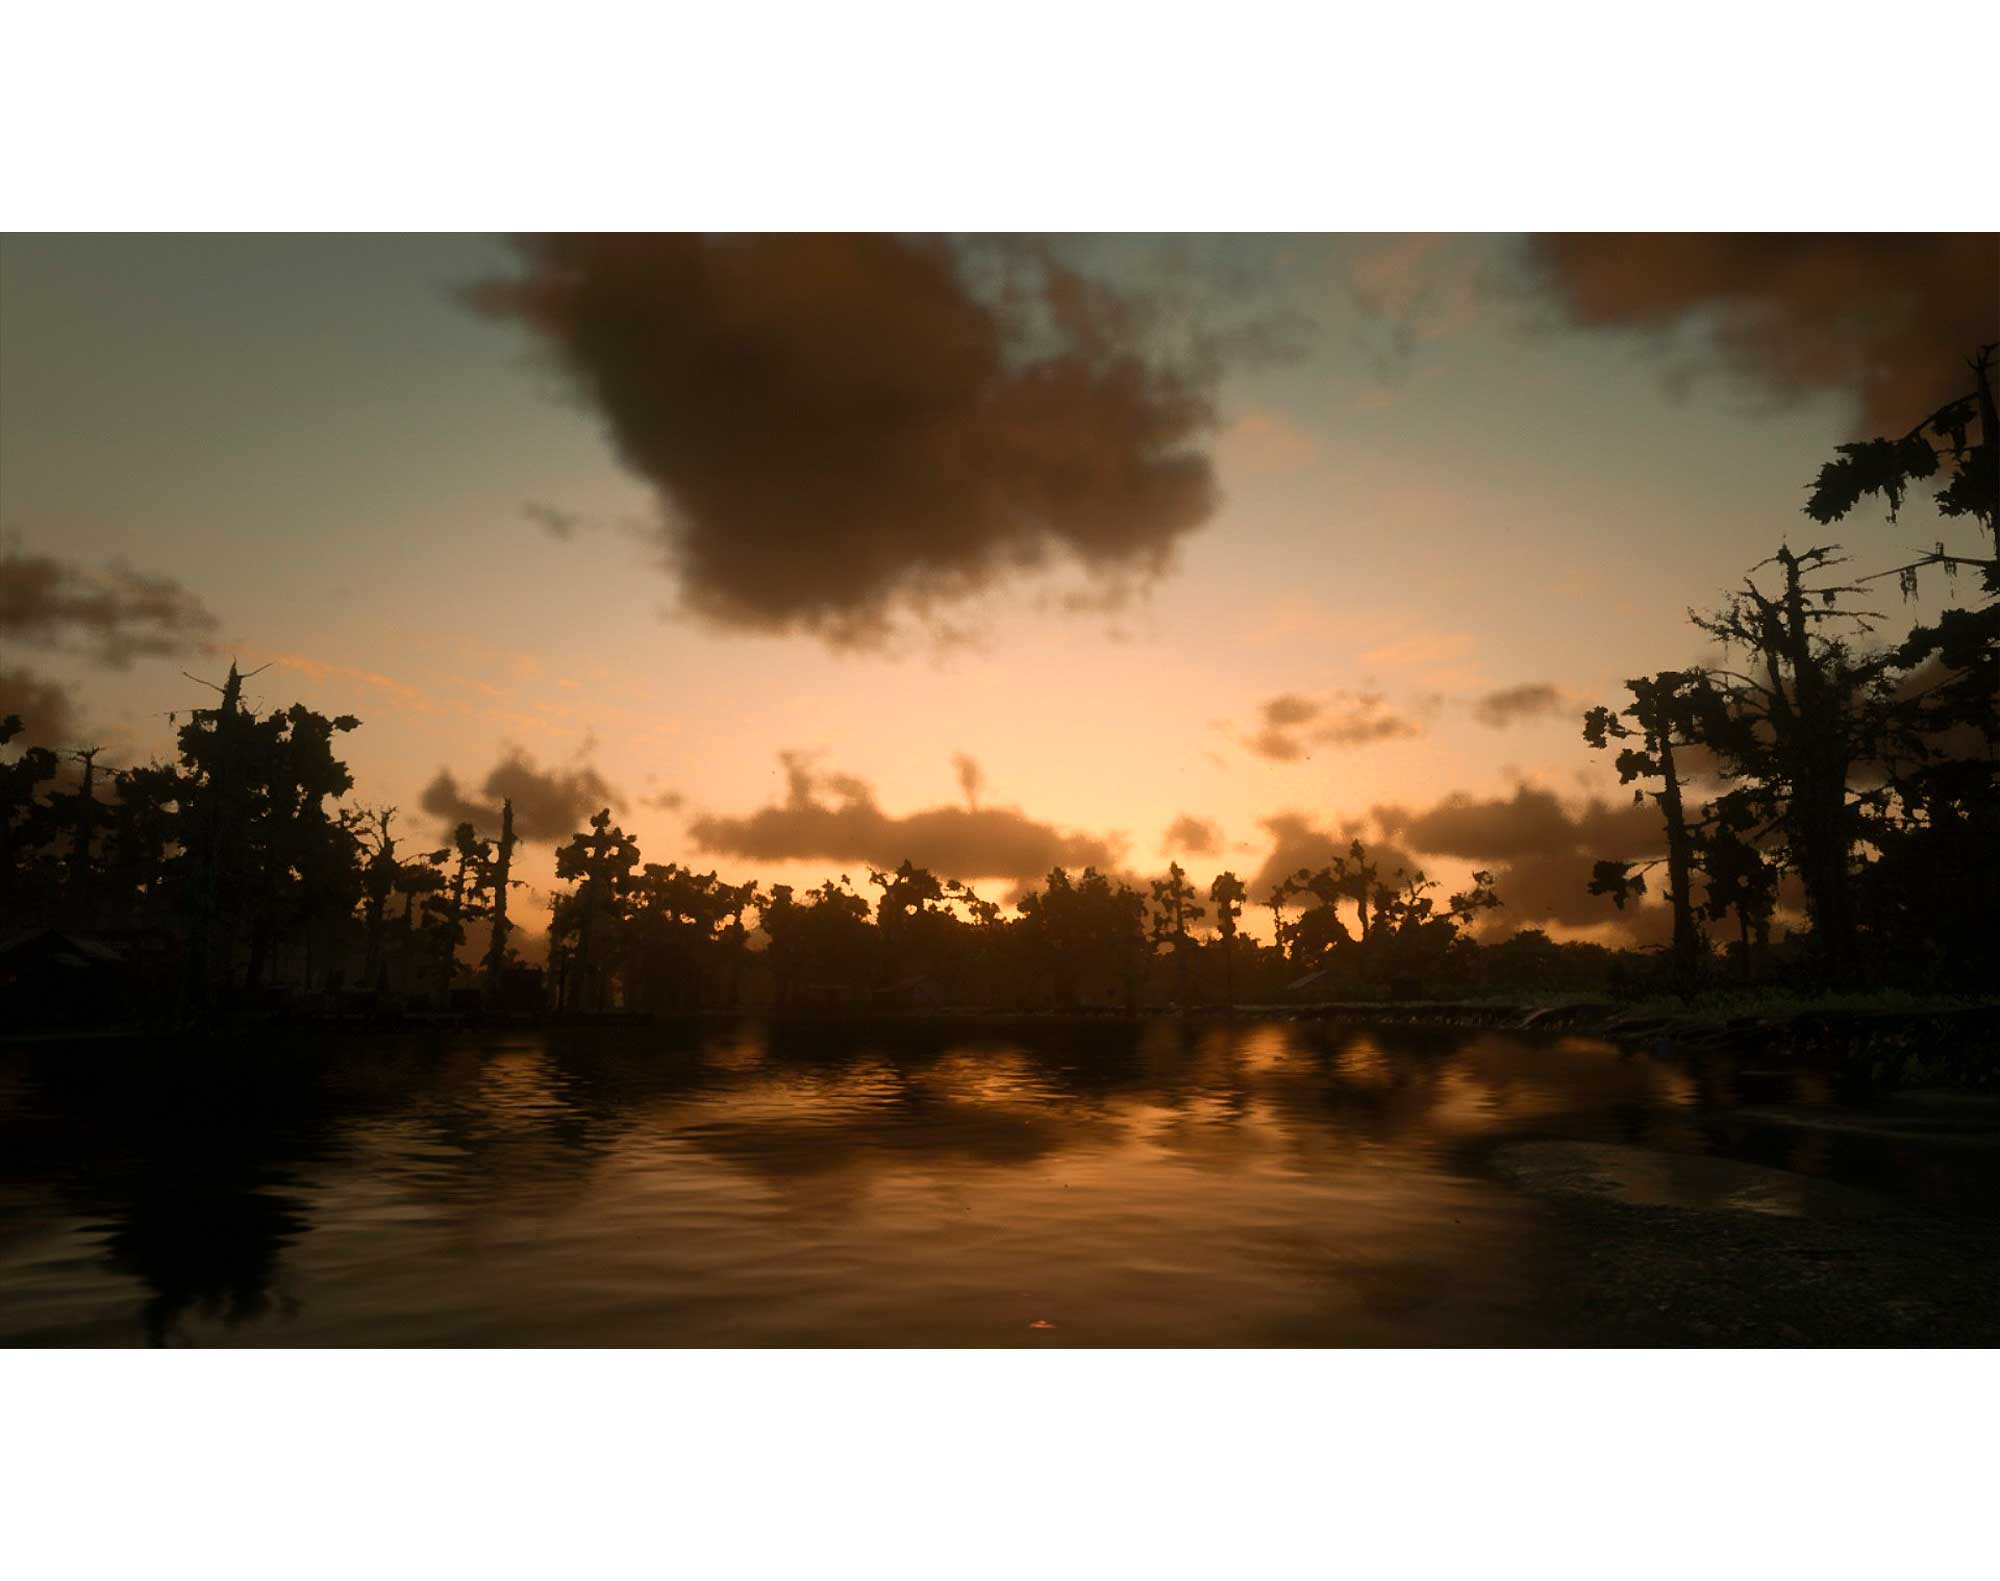 Red Dead Redemption 2 video game photo taken on in-game camera